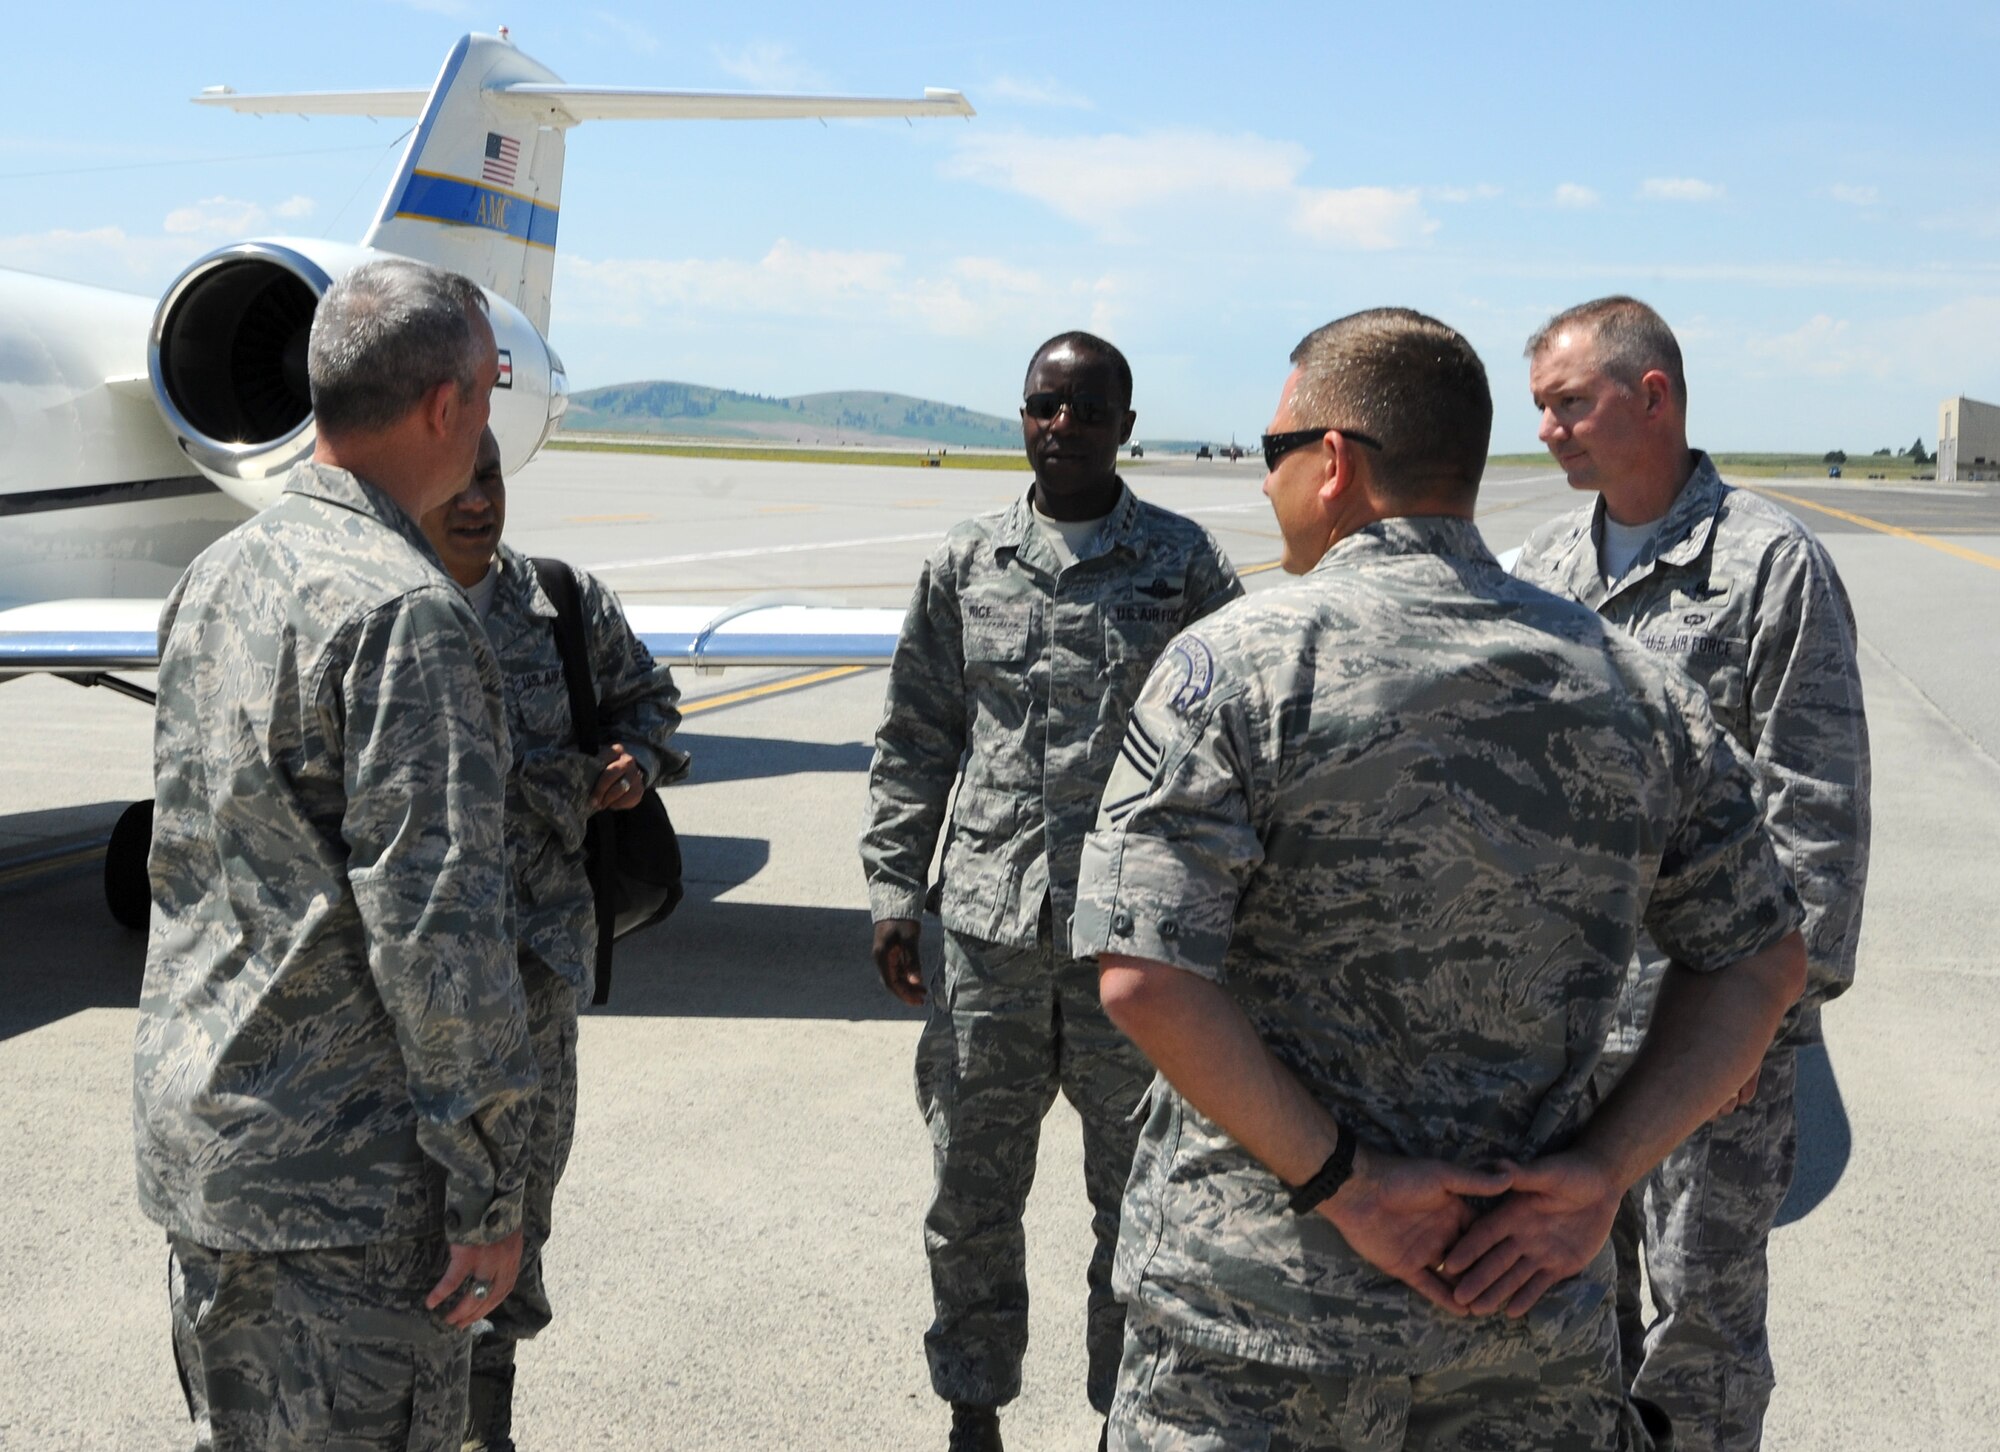 Gen. Edward Rice, commander of the Air Education and Training Command, speaks with Fairchild base leadership upon his arrival Monday, July 1, 2013.  The general was at Fairchild to tour Survival, Evasion, Resistance and Escape facilities.  (U.S. Air Force photo by Airman 1st Class Sam Fogleman/Released)